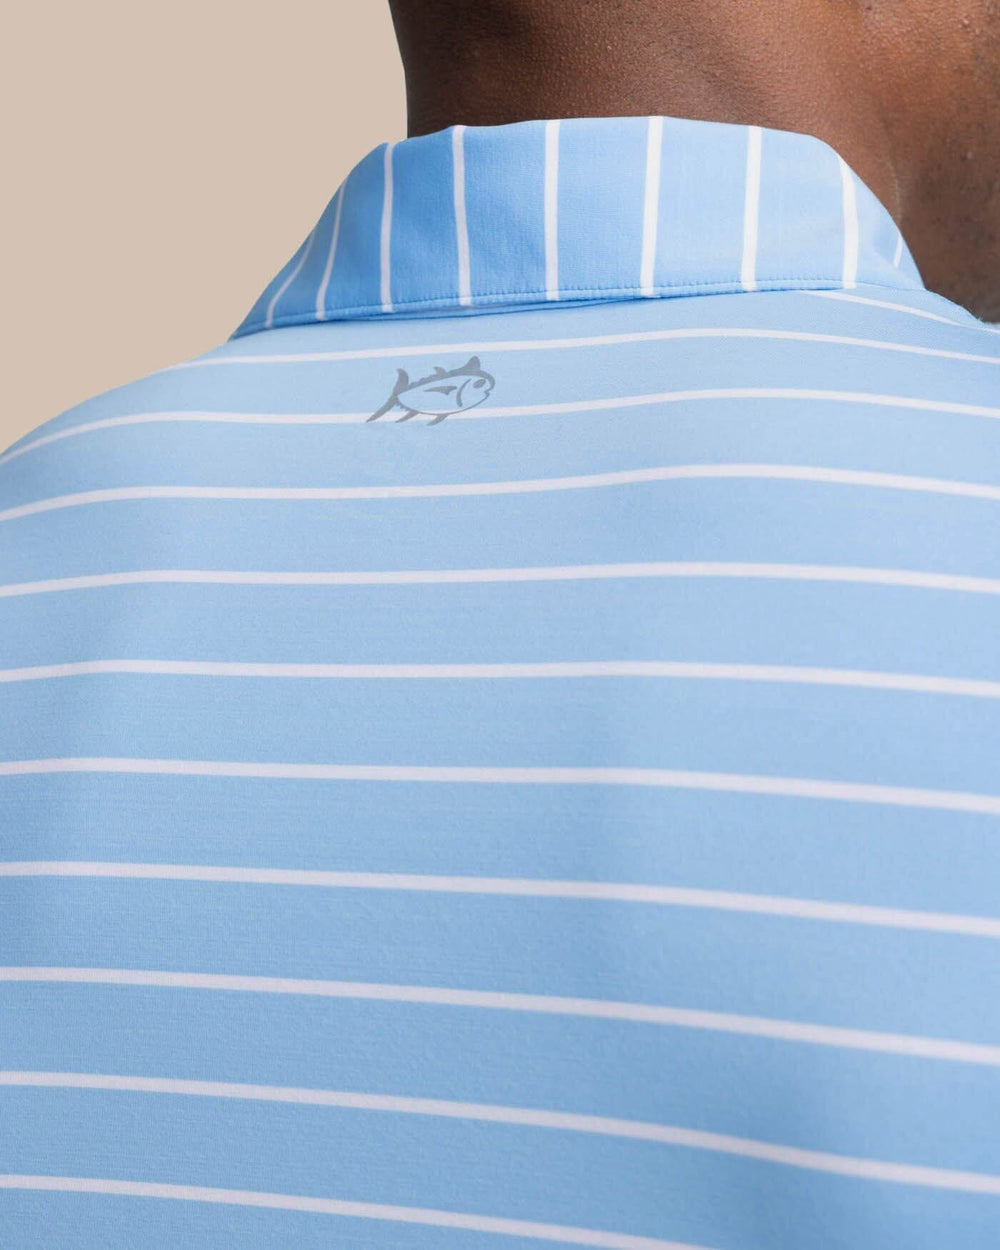 The yoke view of the Southern Tide brrr-eeze Desmond Stripe Performance Polo by Southern Tide - Rush Blue